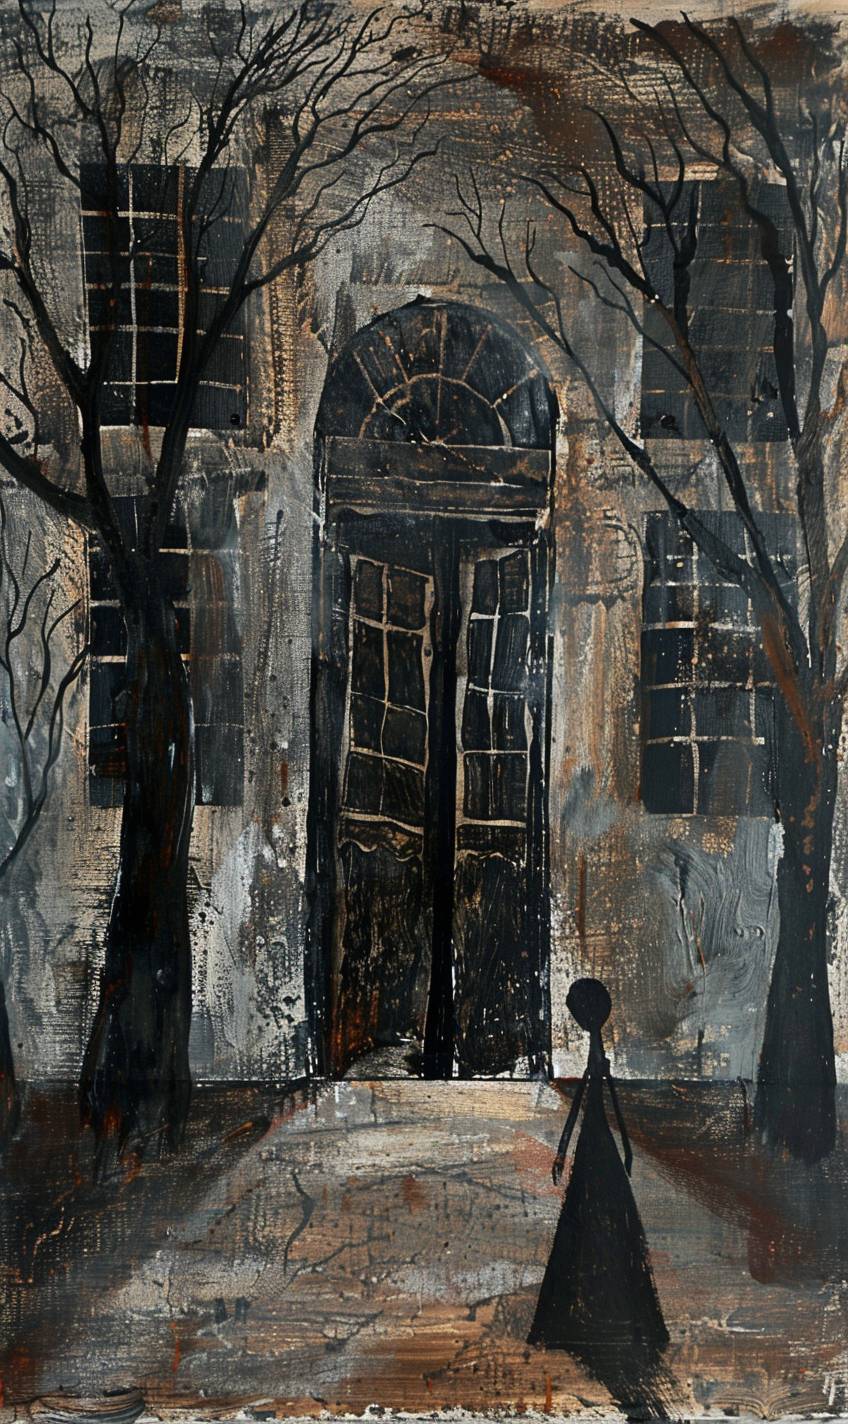 In style of Gary Bunt, Haunted mansion with creaking doors and shadows